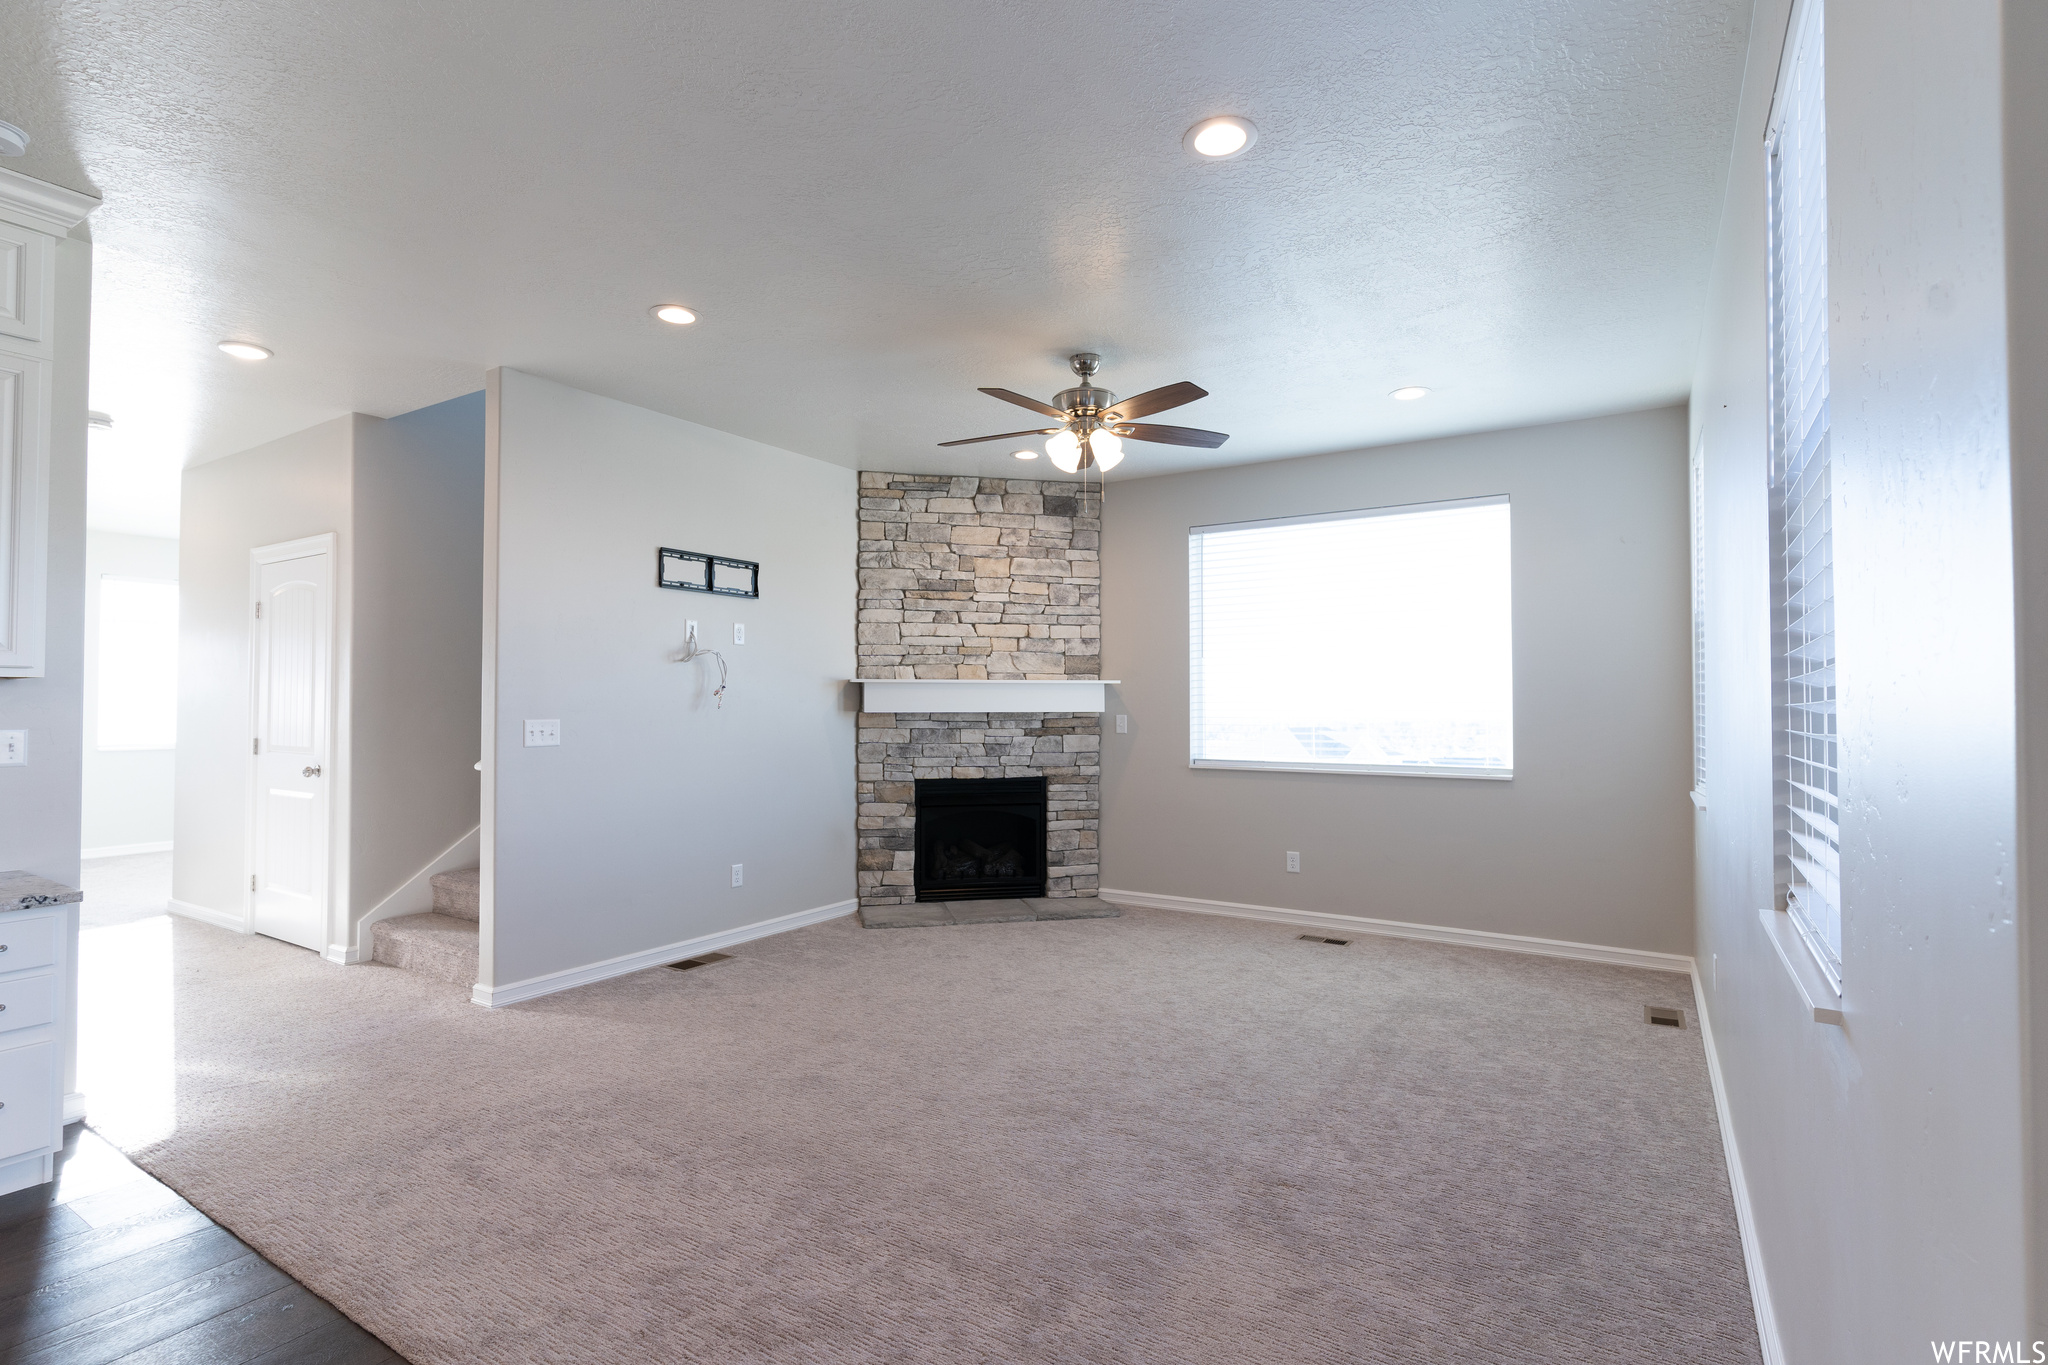 Unfurnished living room featuring a textured ceiling, ceiling fan, a fireplace, and light colored carpet